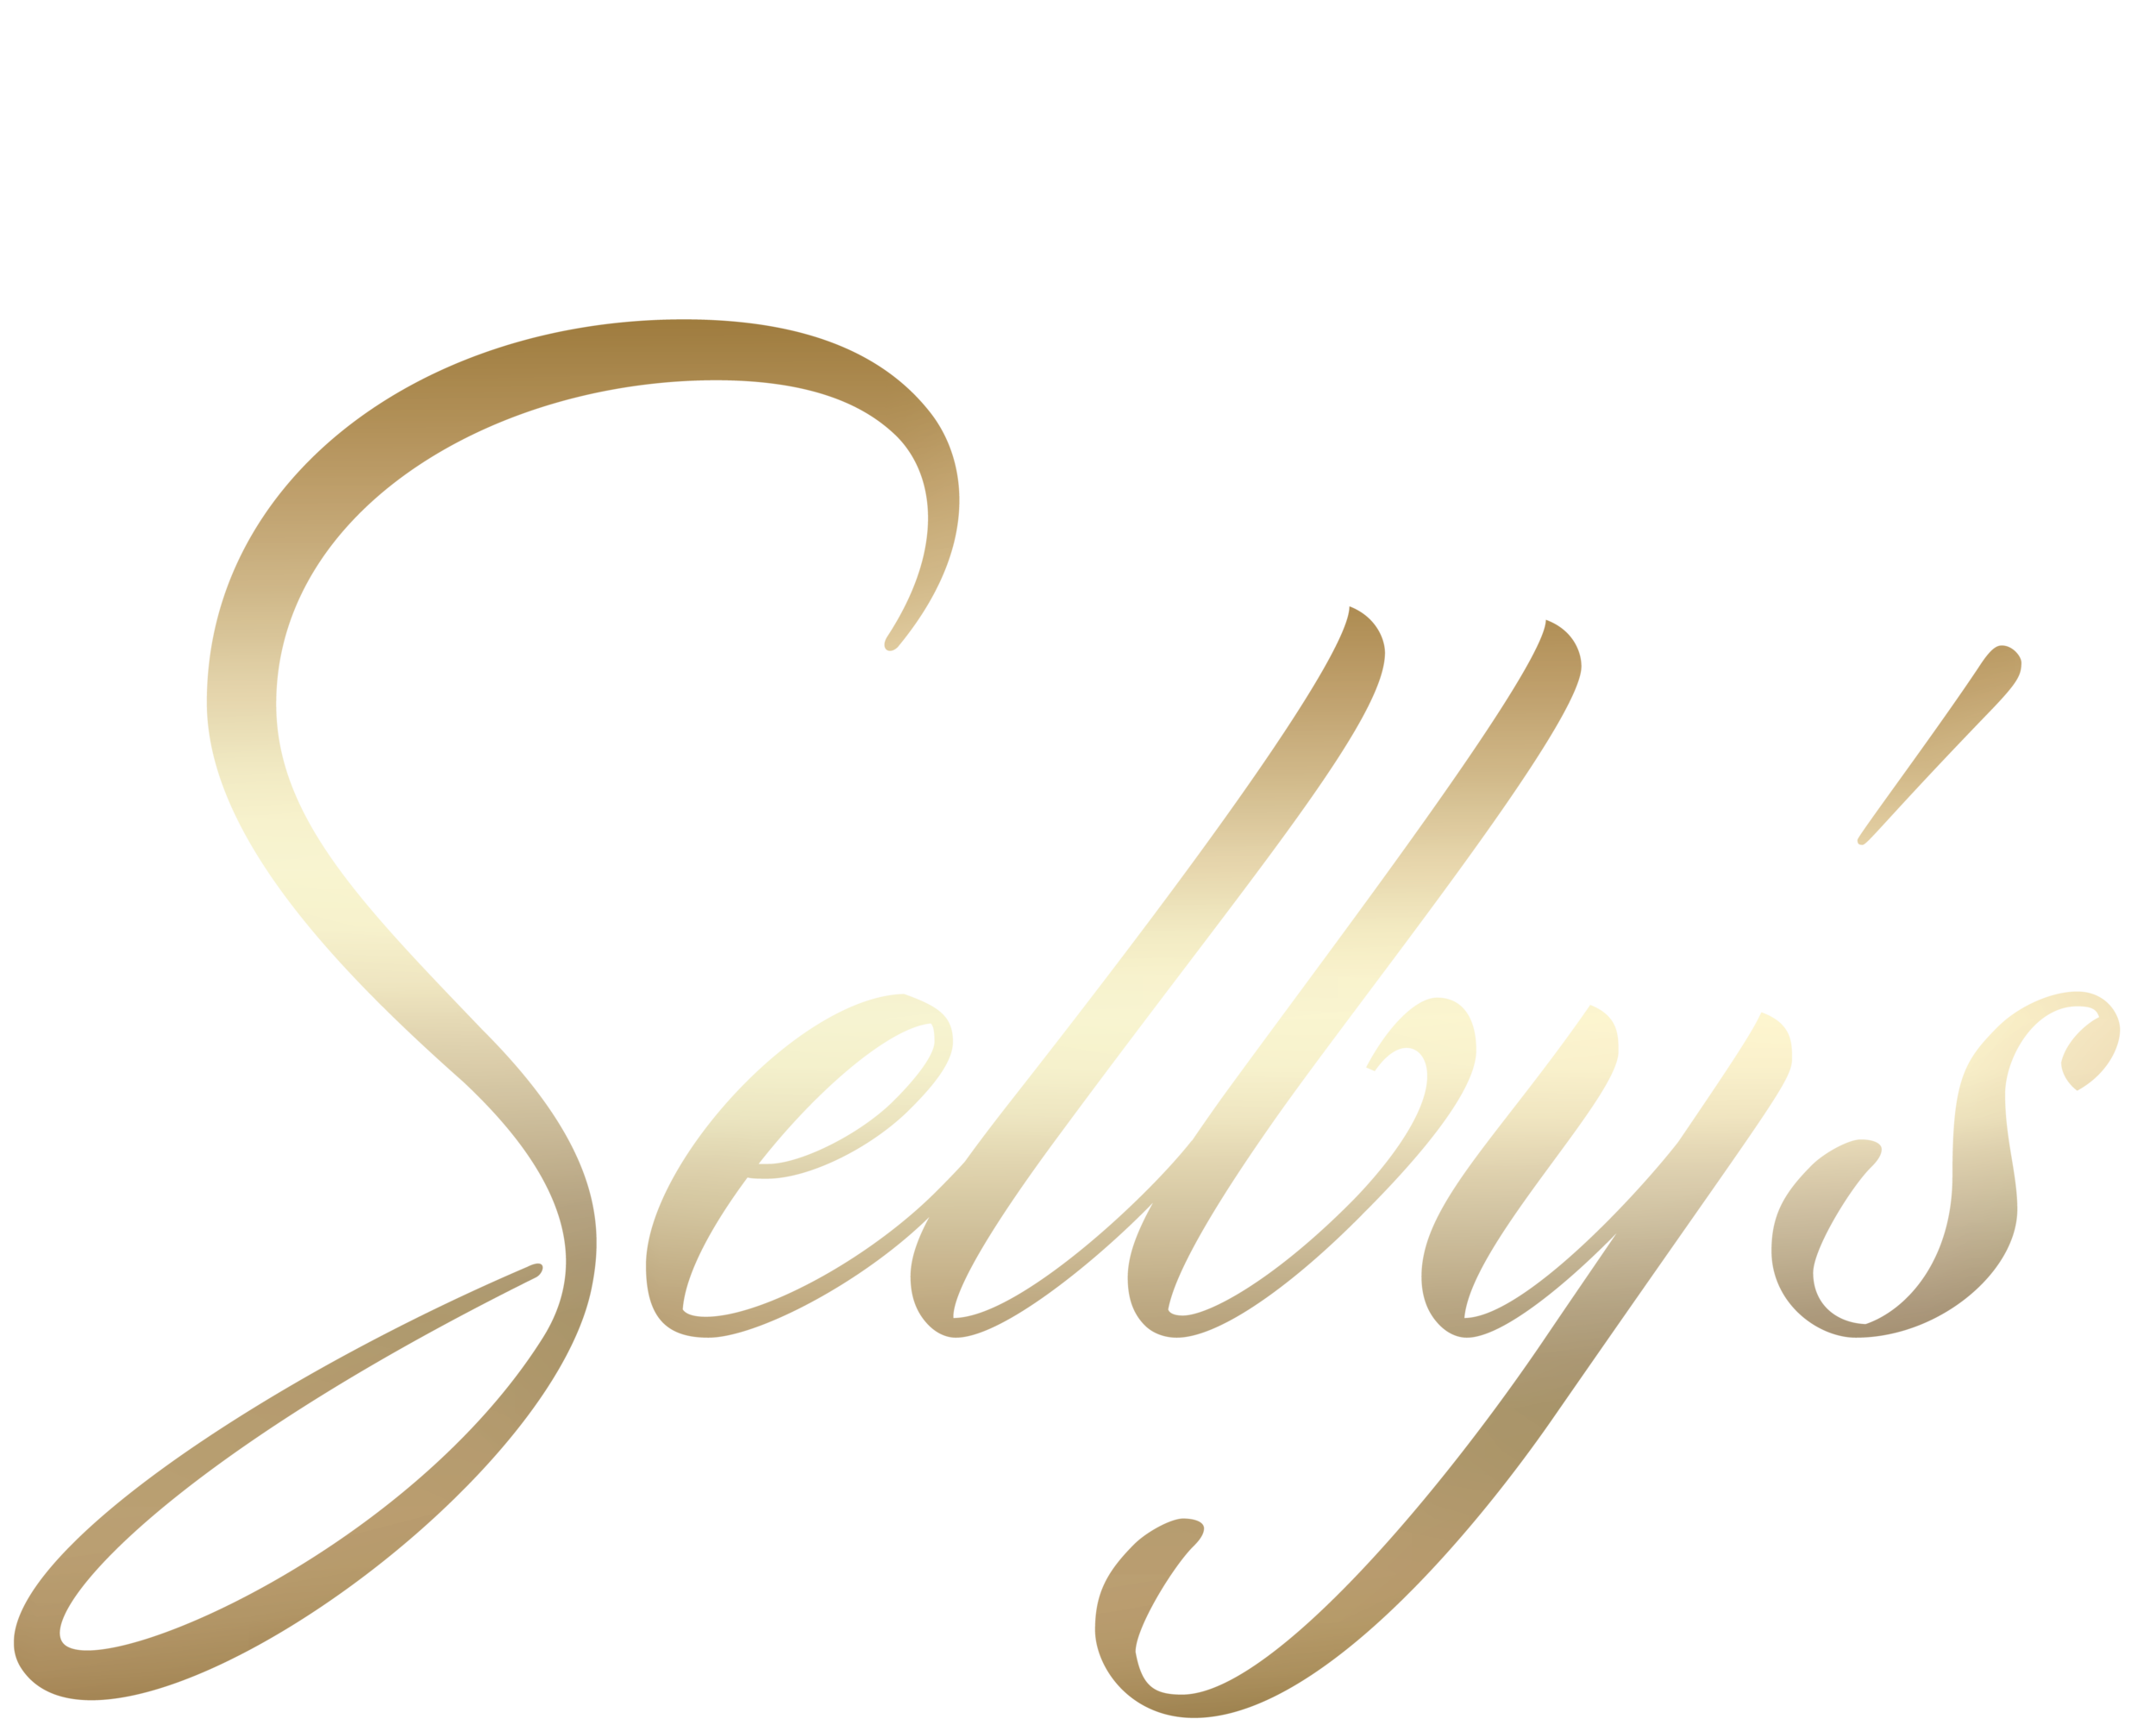 Selby's